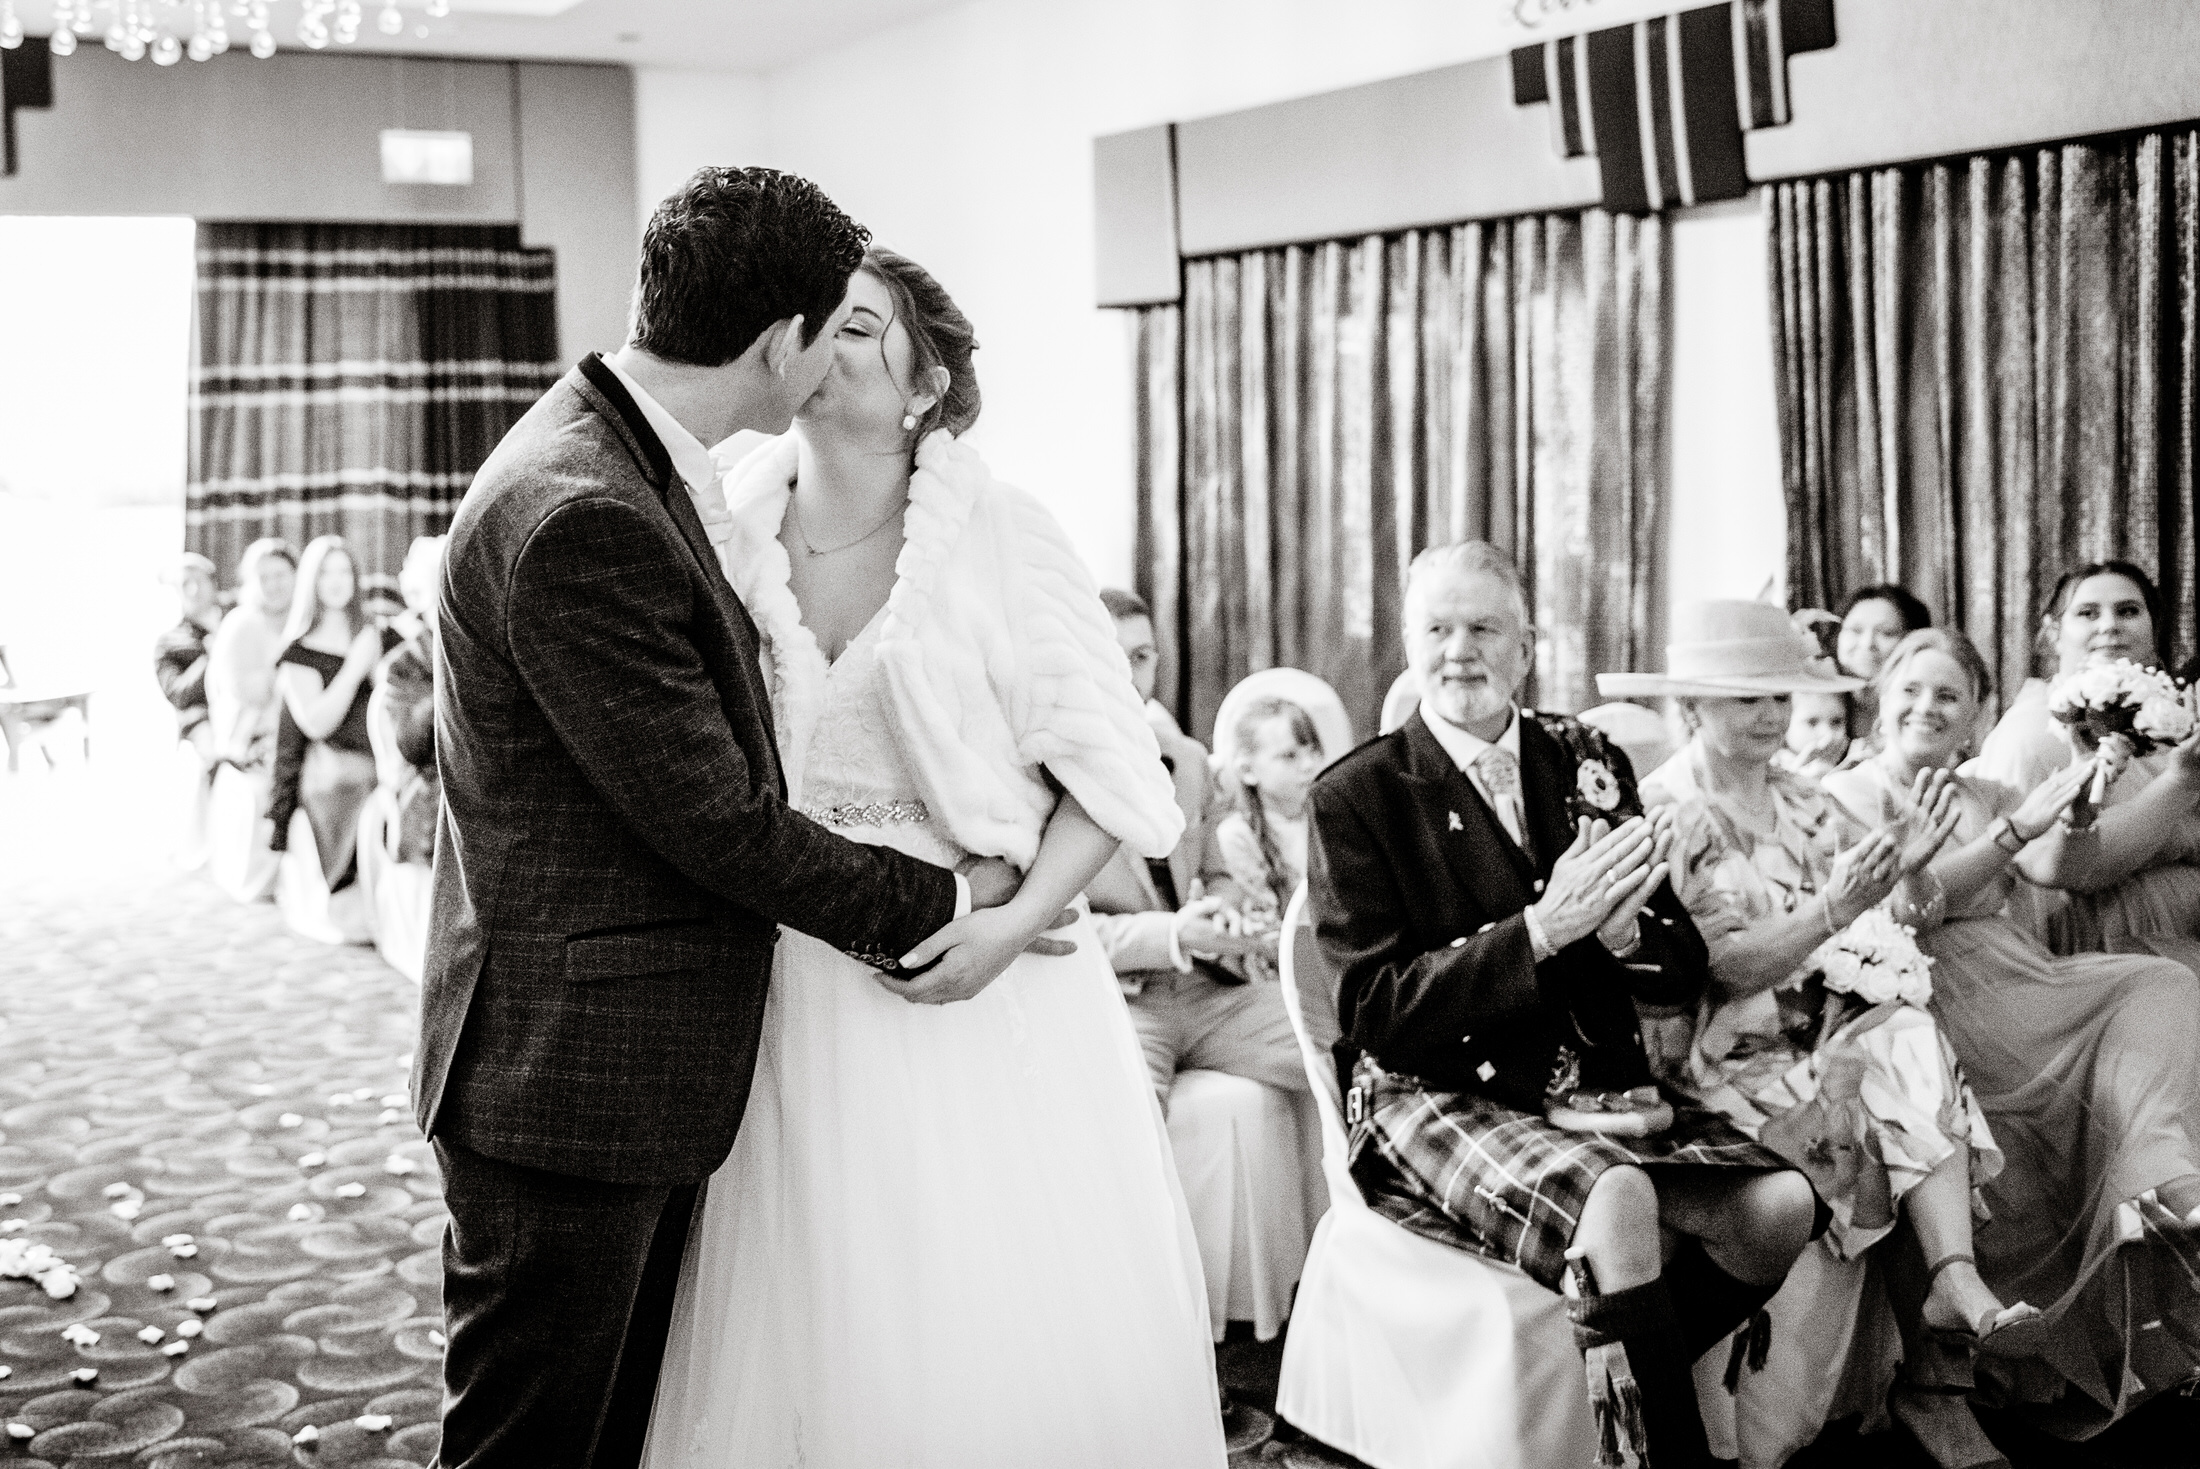 A bride and groom share a tender kiss during their wedding ceremony at Brackenborough Hotel.